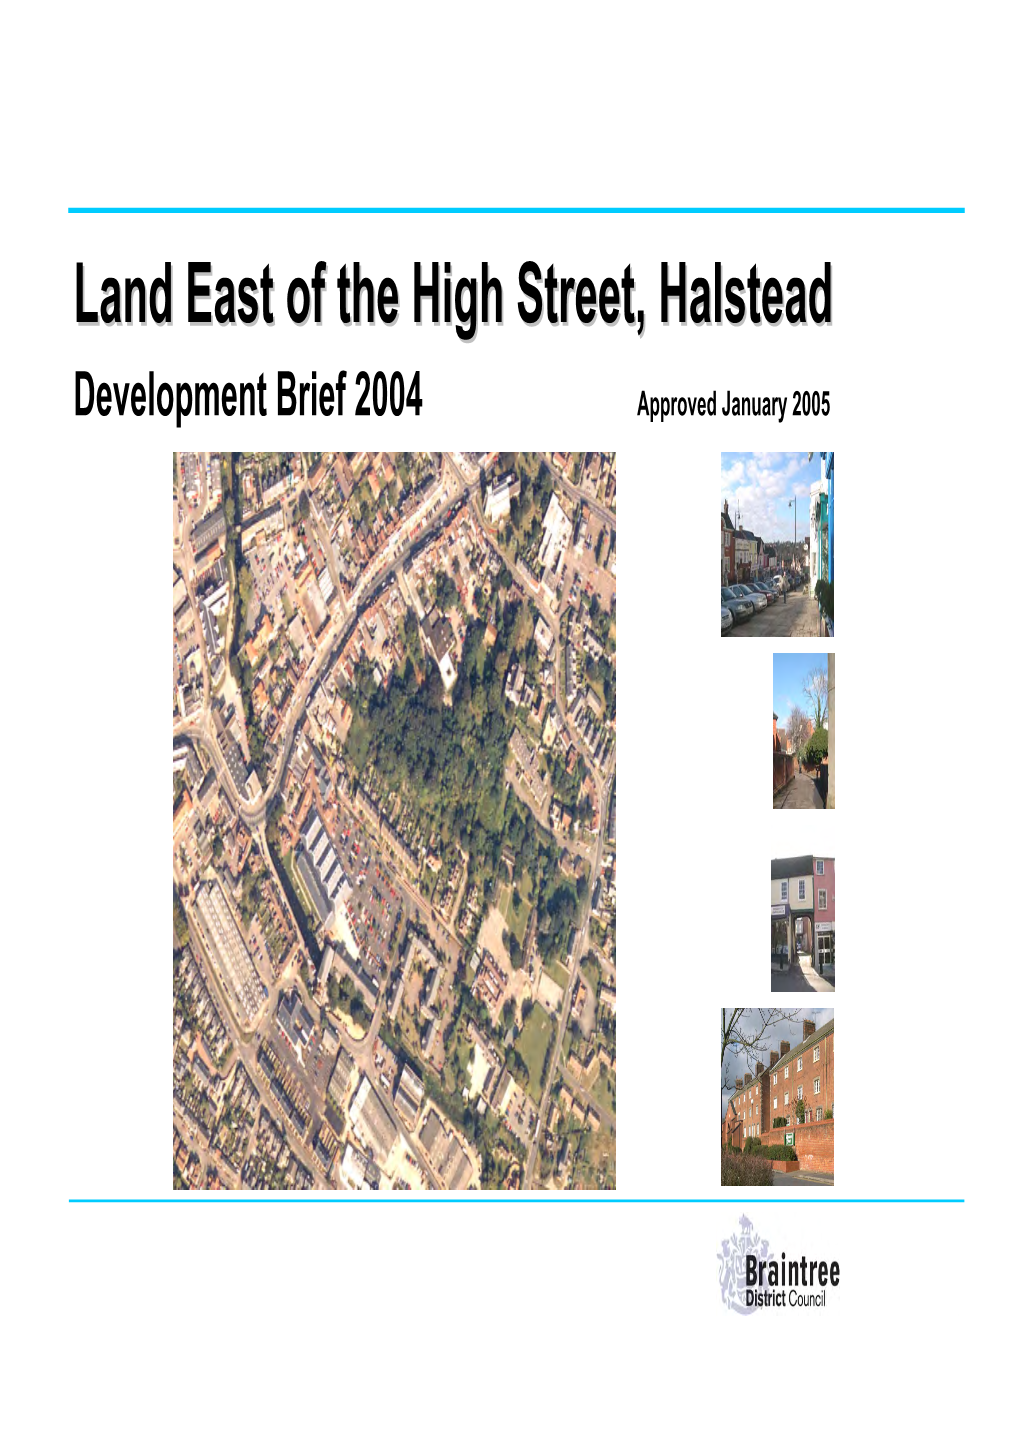 Land East of the High Street, Halstead - Development Brief (Agenda Item 7) Seeking Authority to Approve the Brief As a Supplementary Planning Document